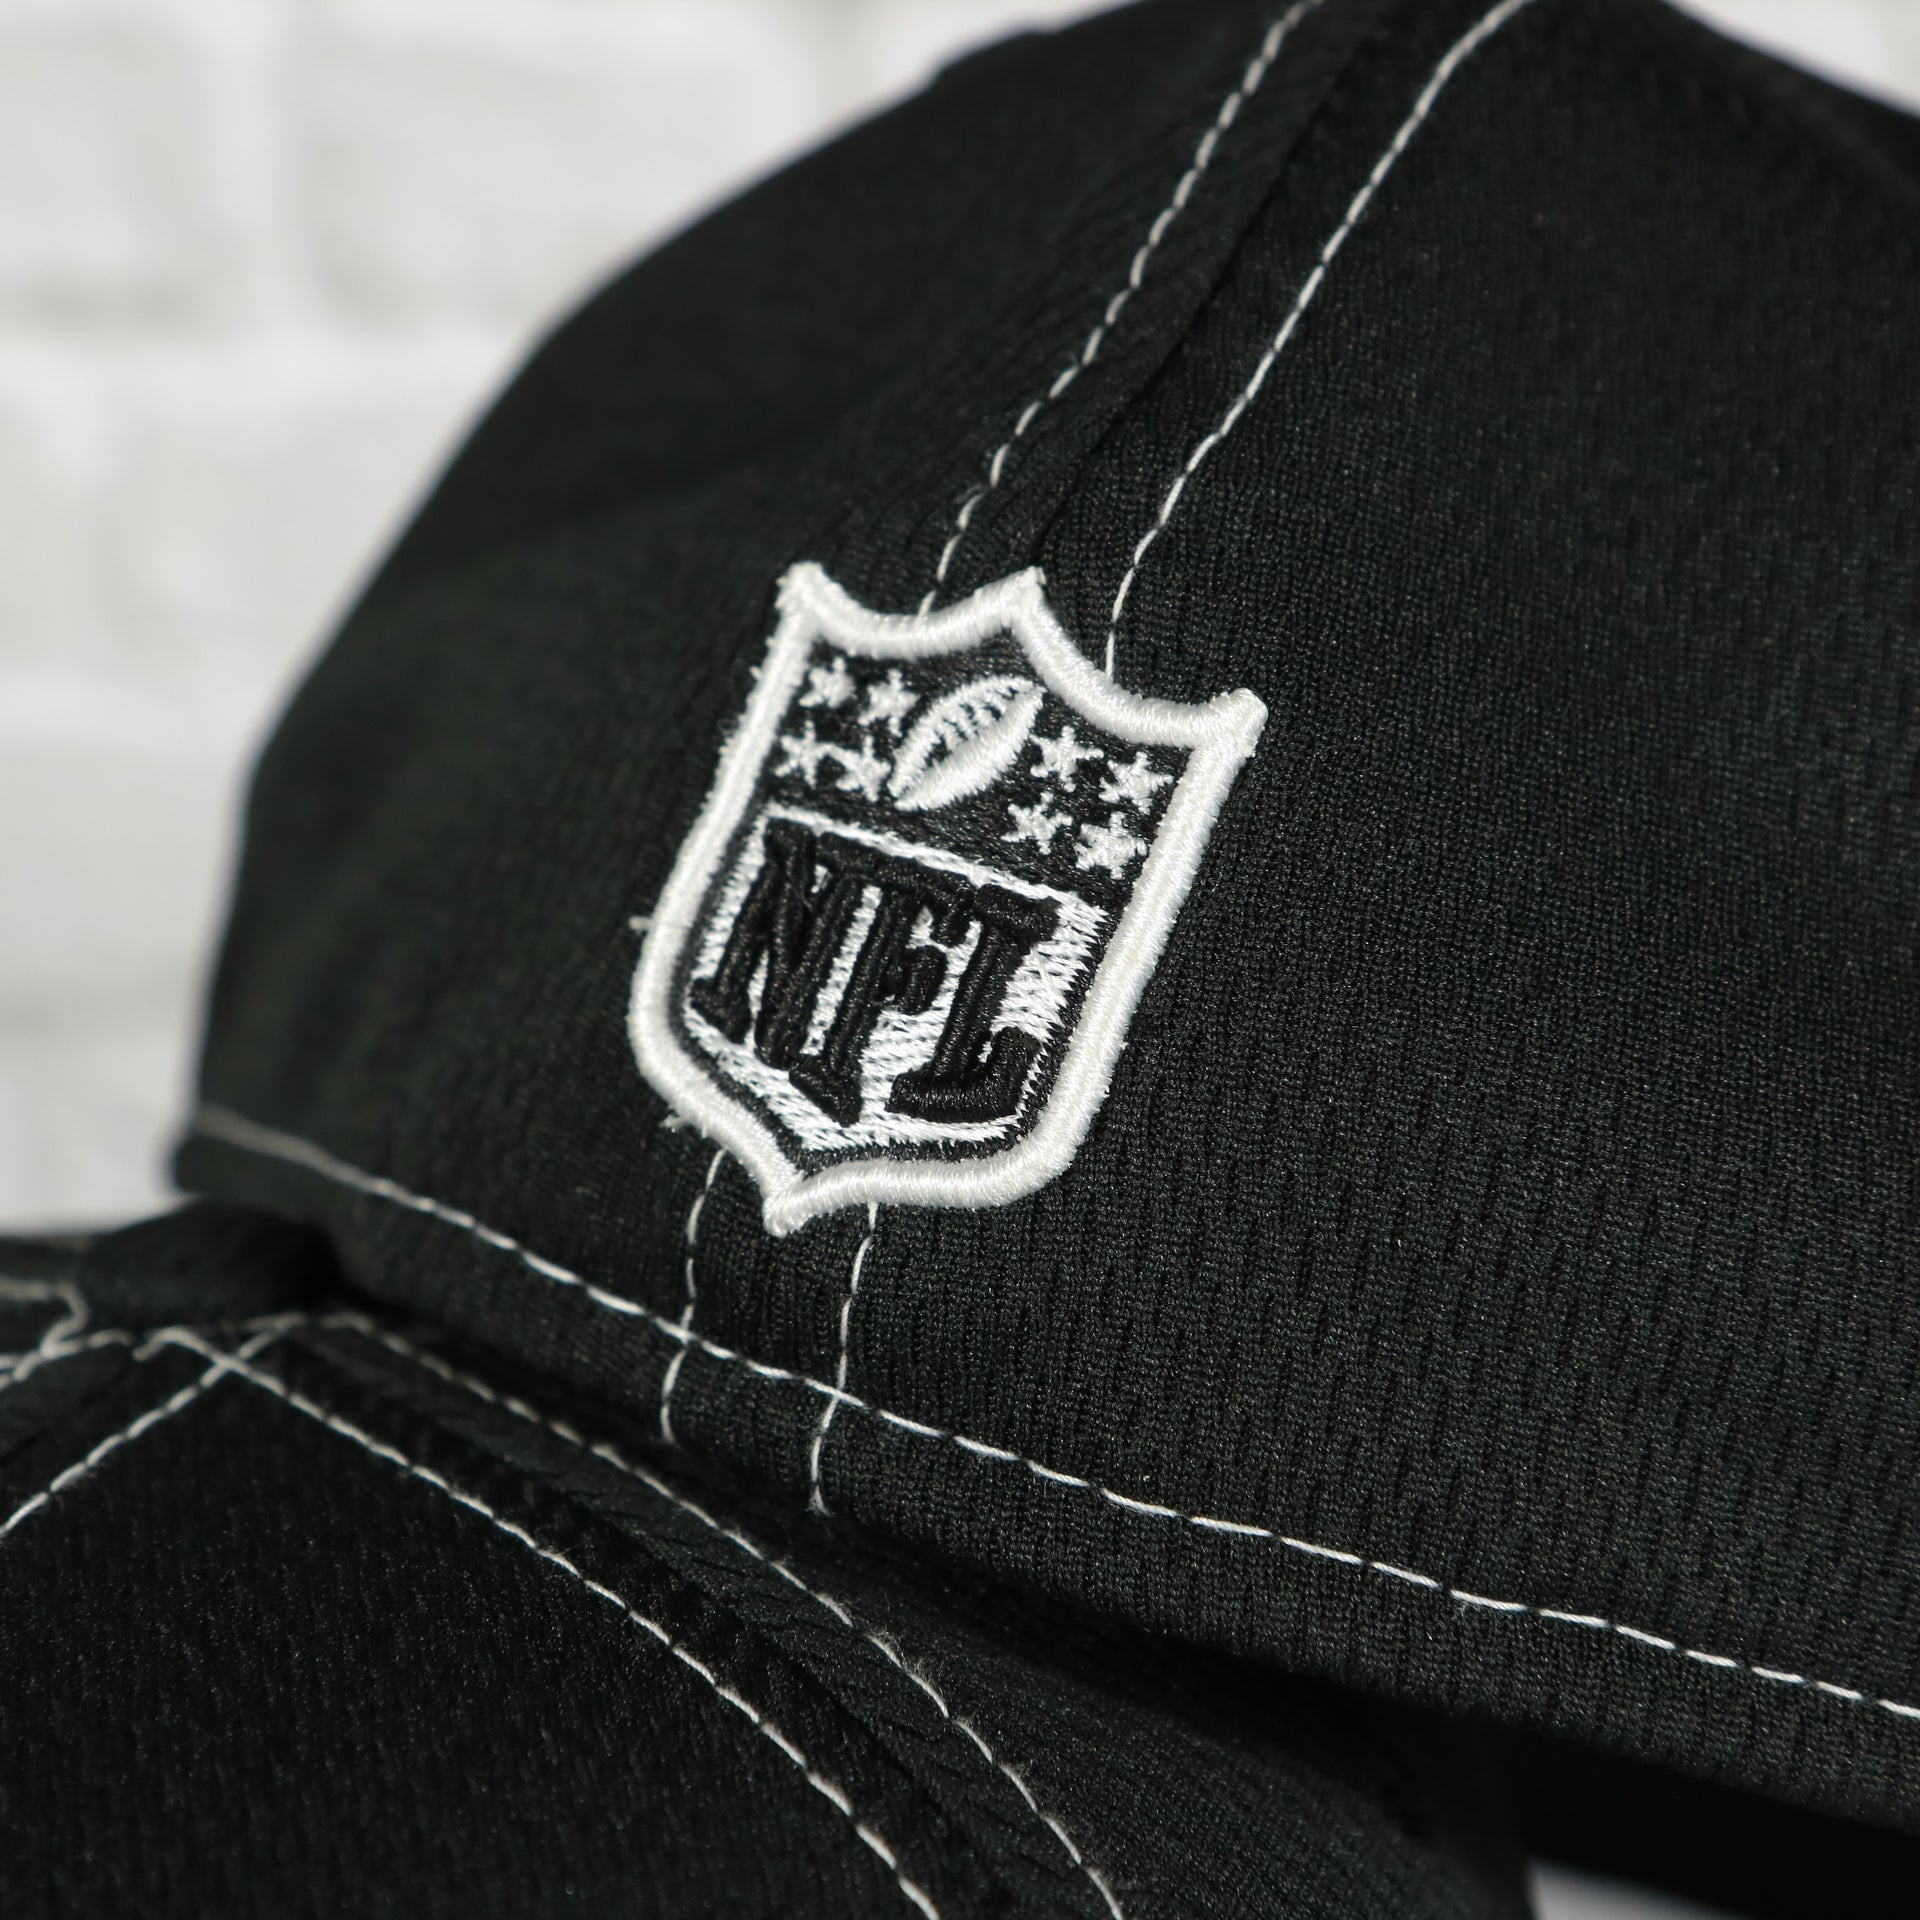 NFL logo on the Philadelphia Eagles NFL 2019 "1993" Eagles side patch | Black 59Fifty Fitted Cap